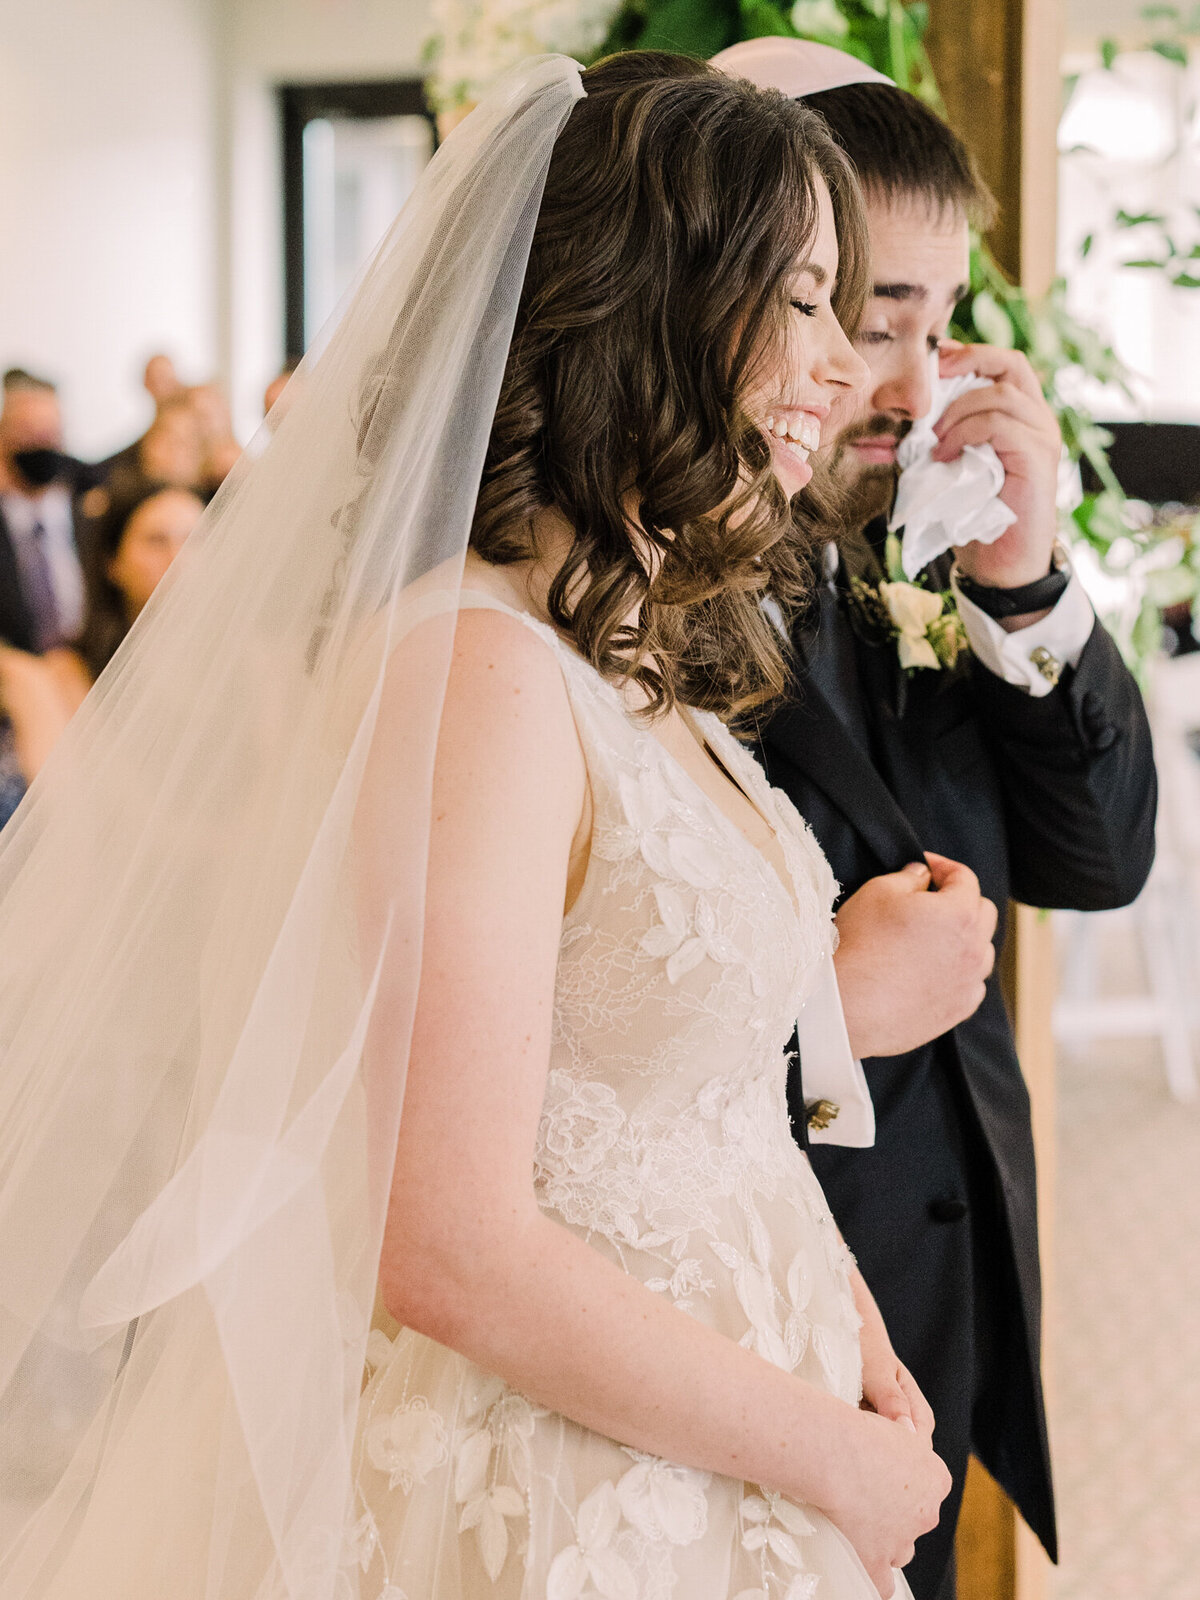 A heartfelt moment during a traditional Jewish wedding ceremony in Chicago